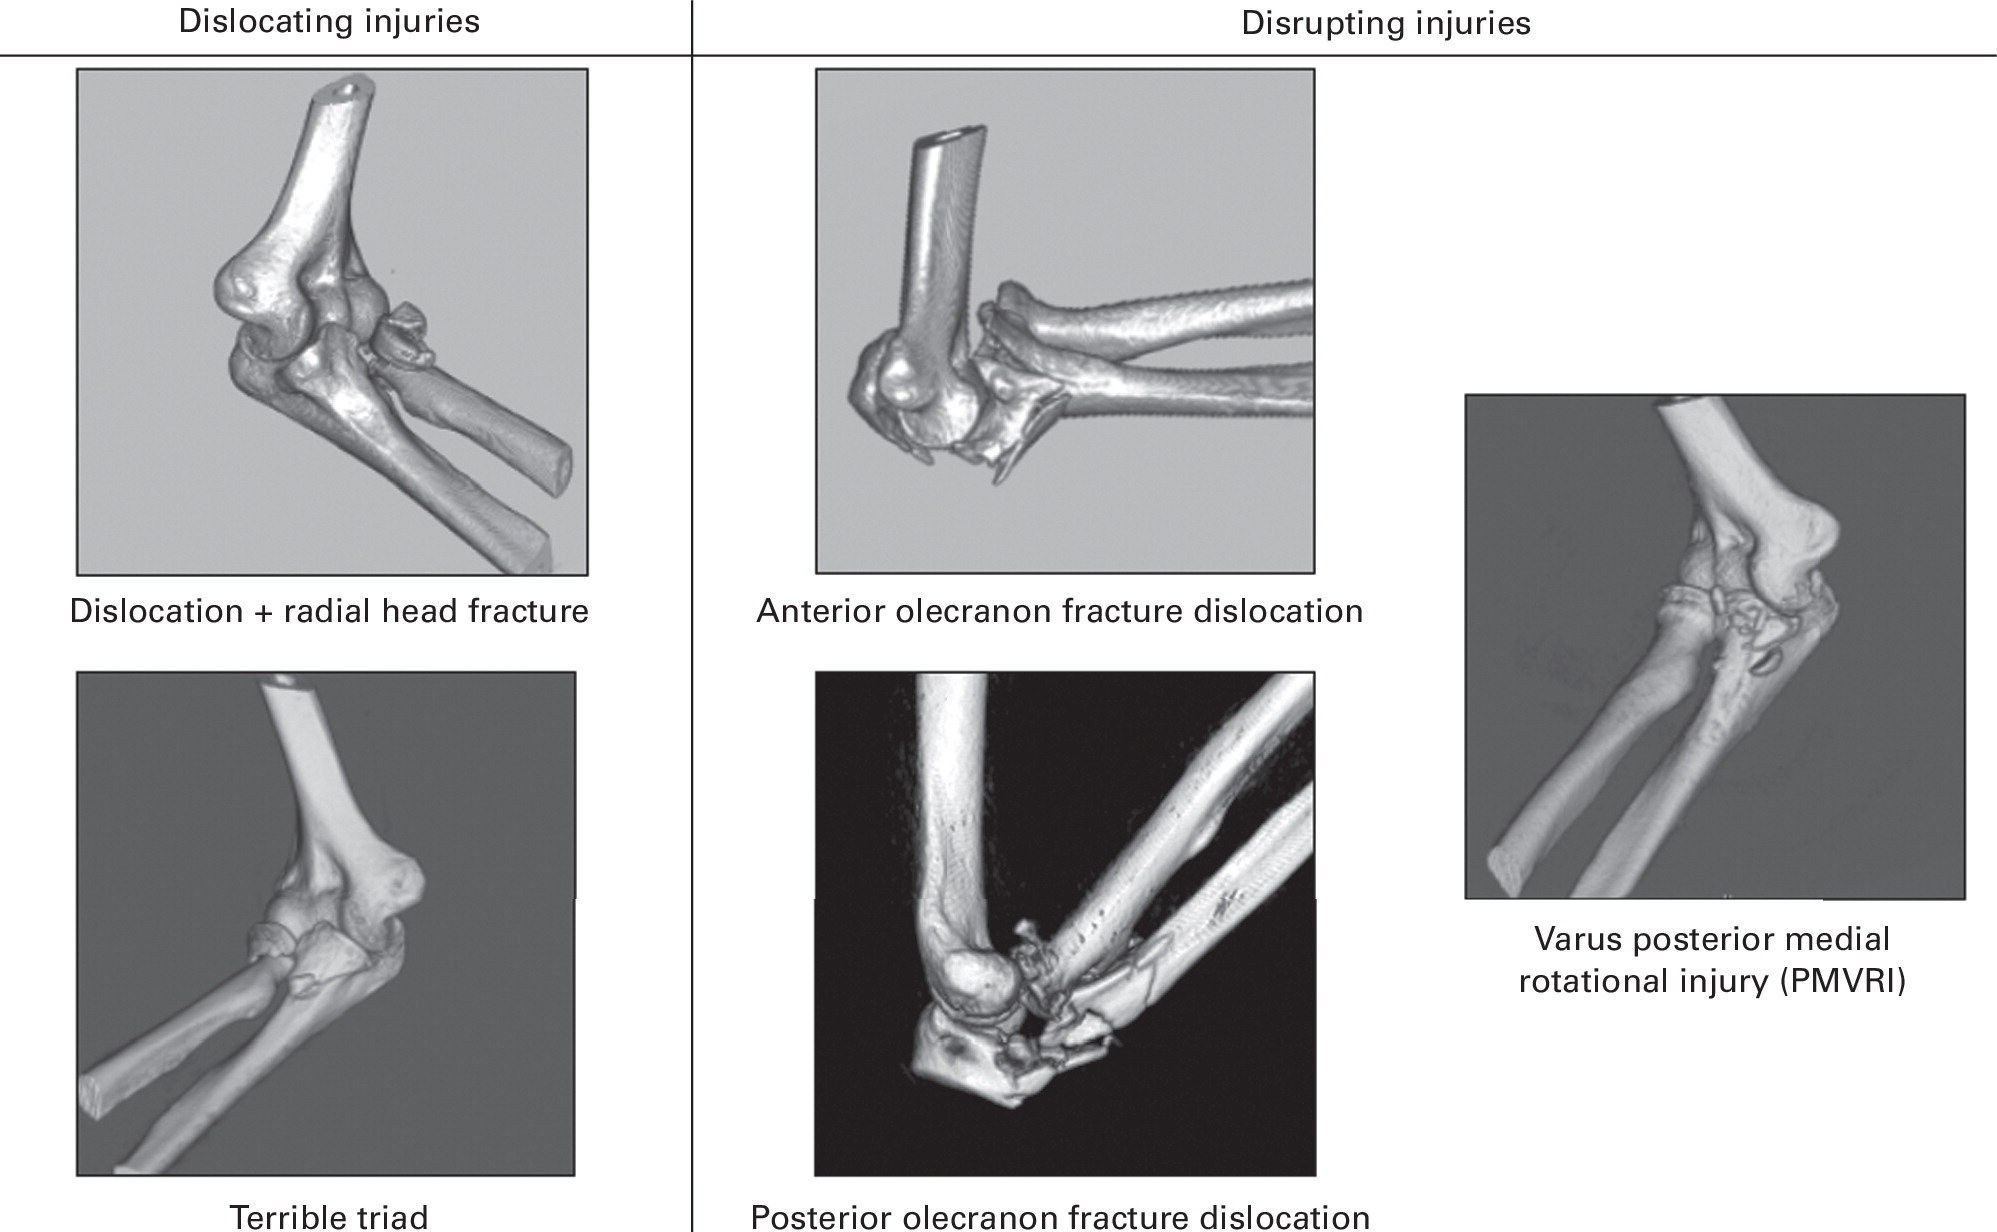 Recognition of the pattern of complex fractures of the elbow using 3D-printed models